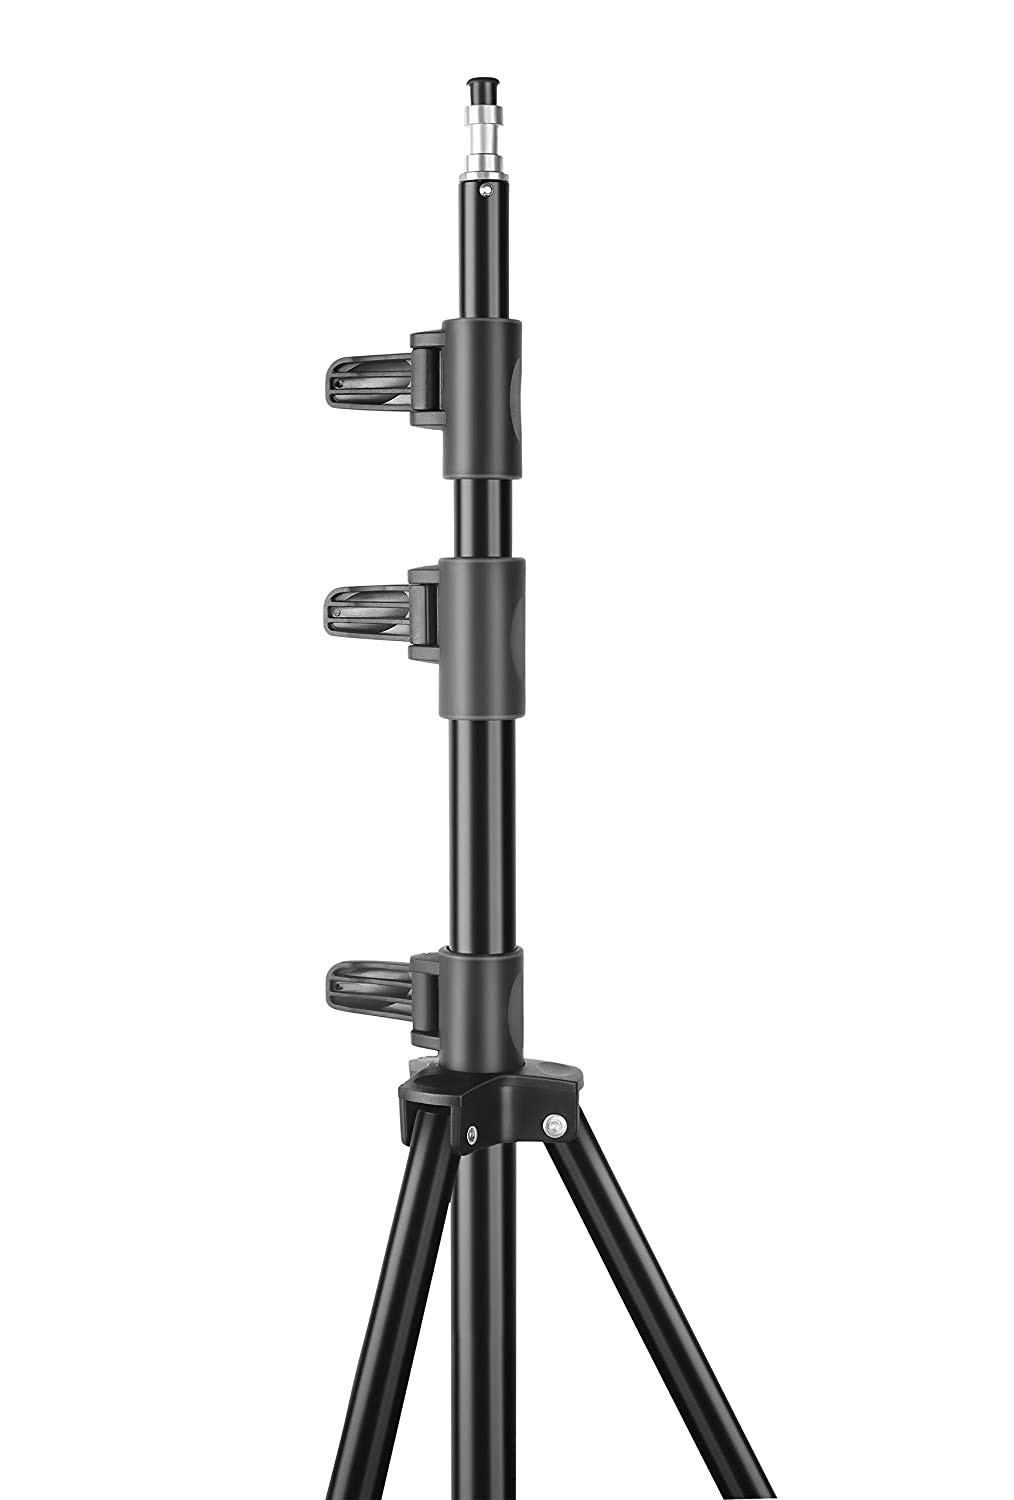 Photography Light Stand 9ft for Indoor and Outdoor Photography, PLSSTDD